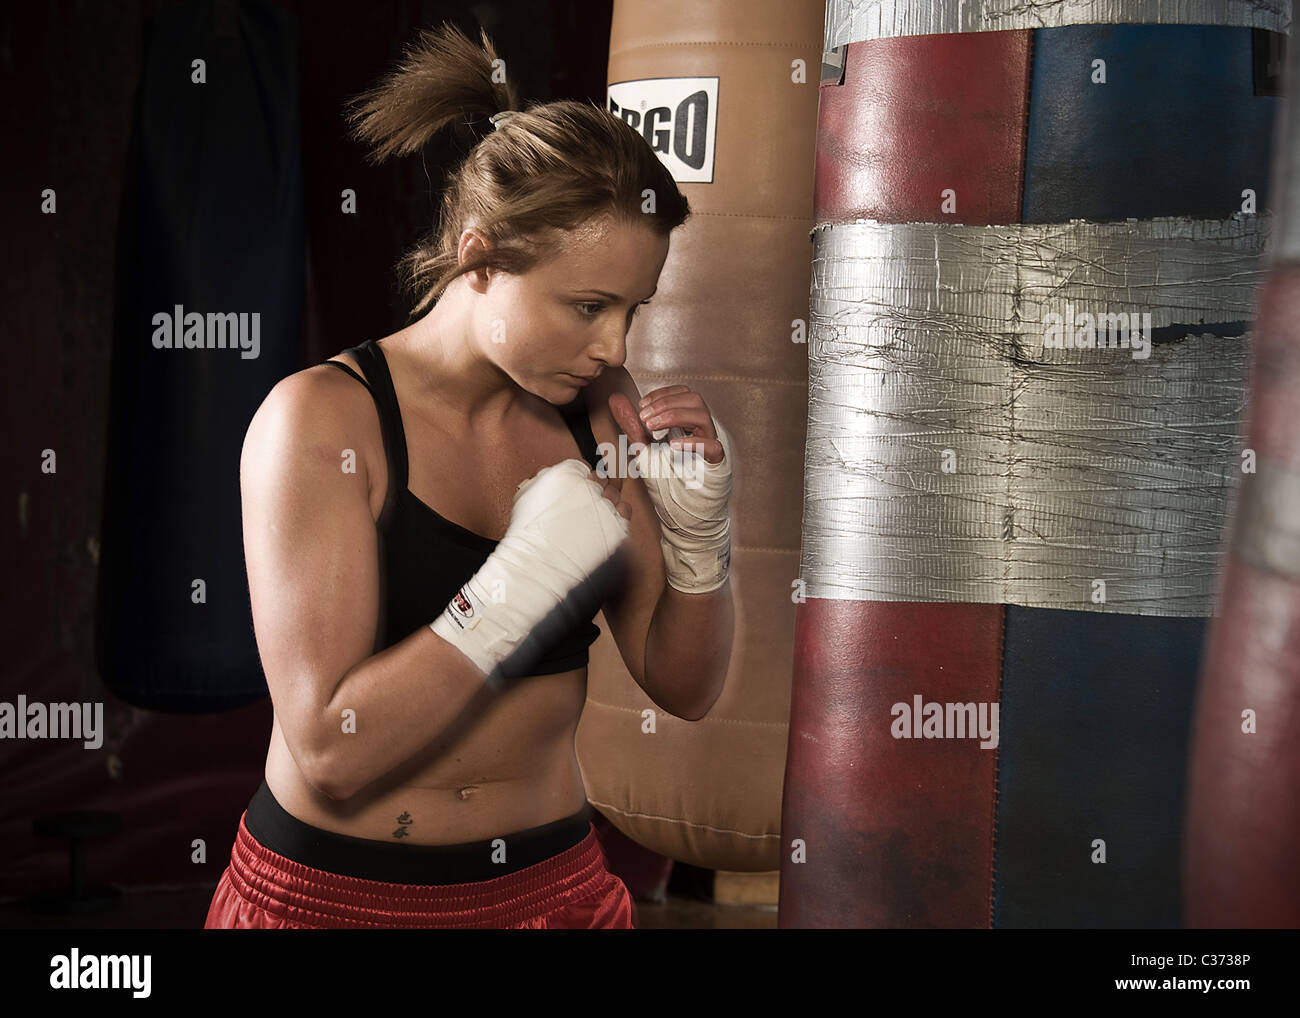 Female boxer training with punch bags Stock Photo